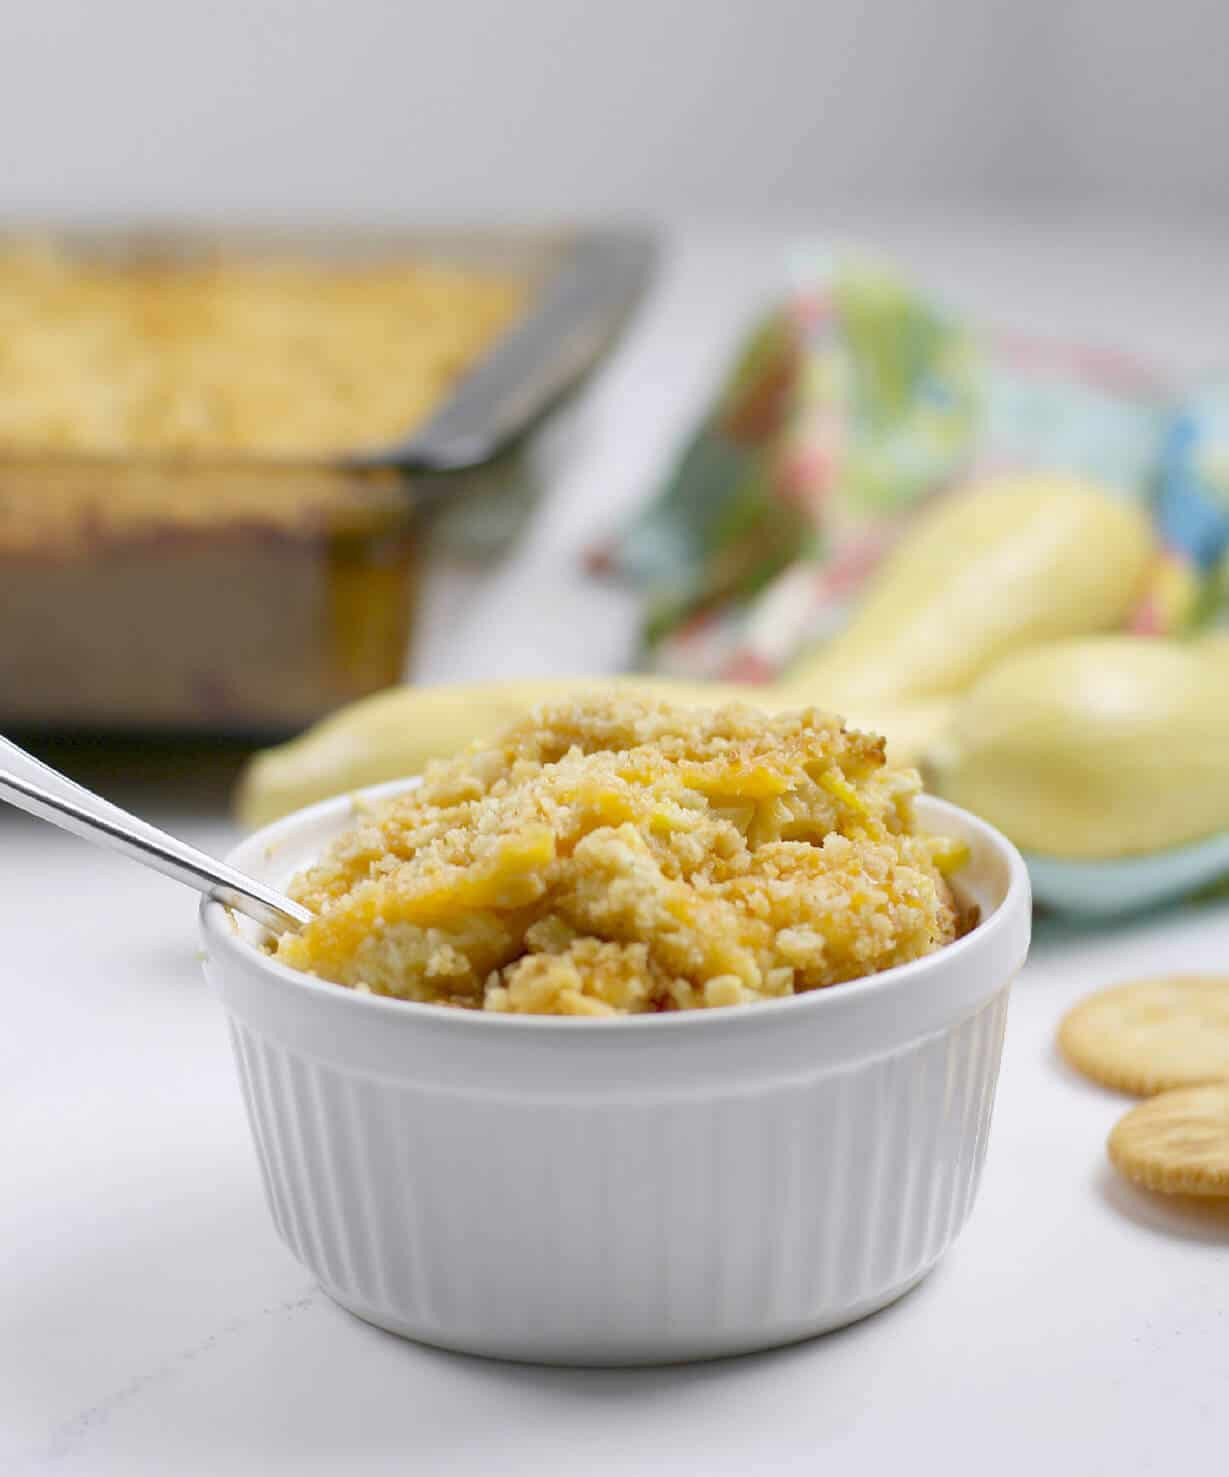 Squash Casserole With Ritz Crackers
 Southern Squash Casserole fort Food